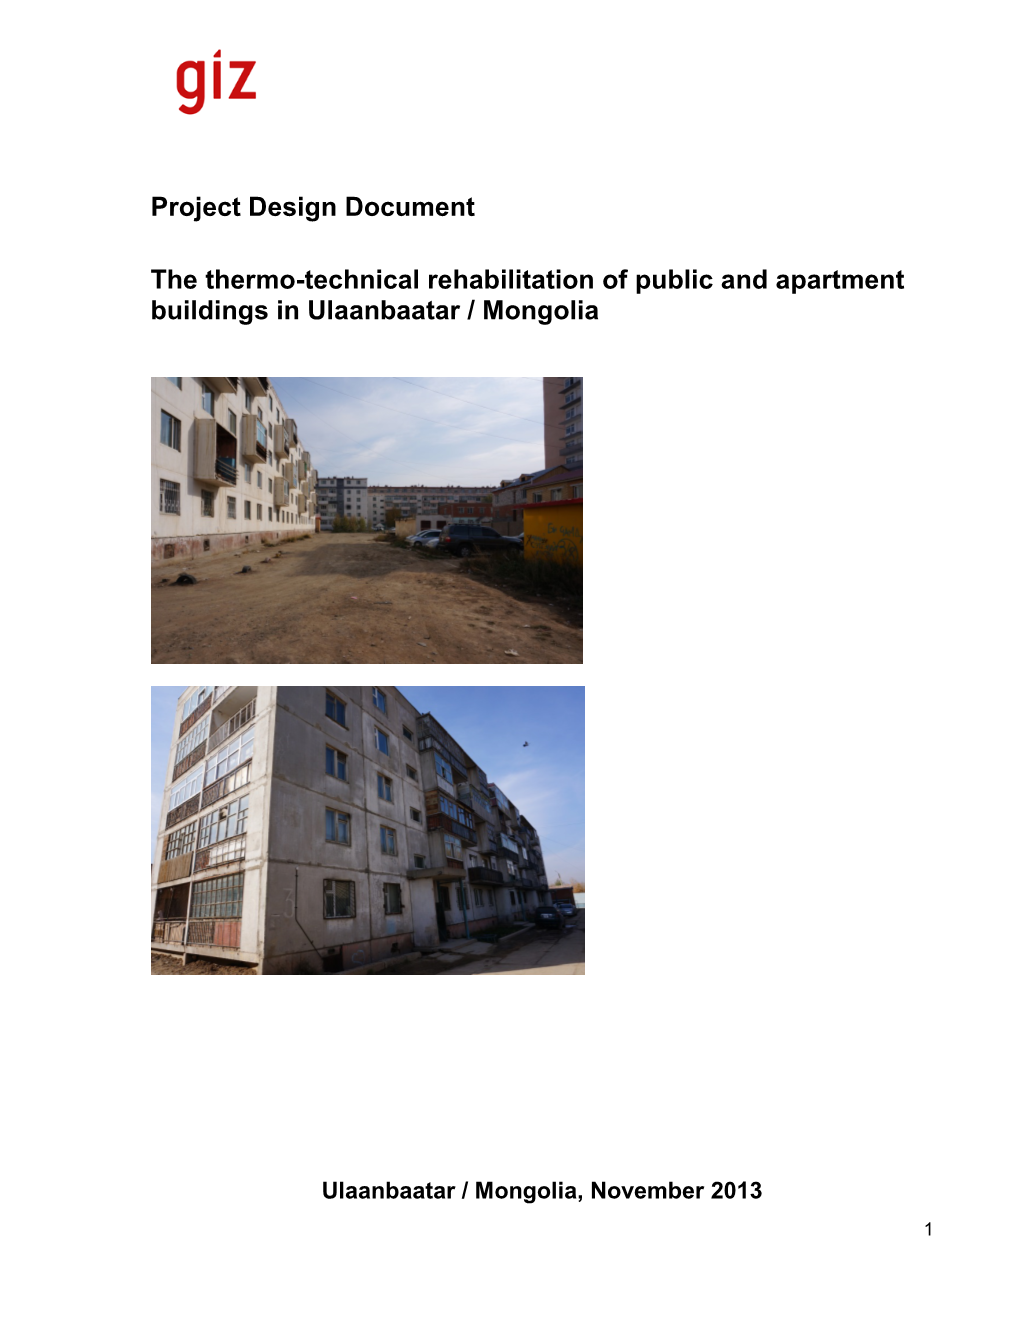 The Thermo-Technical Rehabilitation of Public and Apartment Buildings in Ulaanbaatar / Mongolia